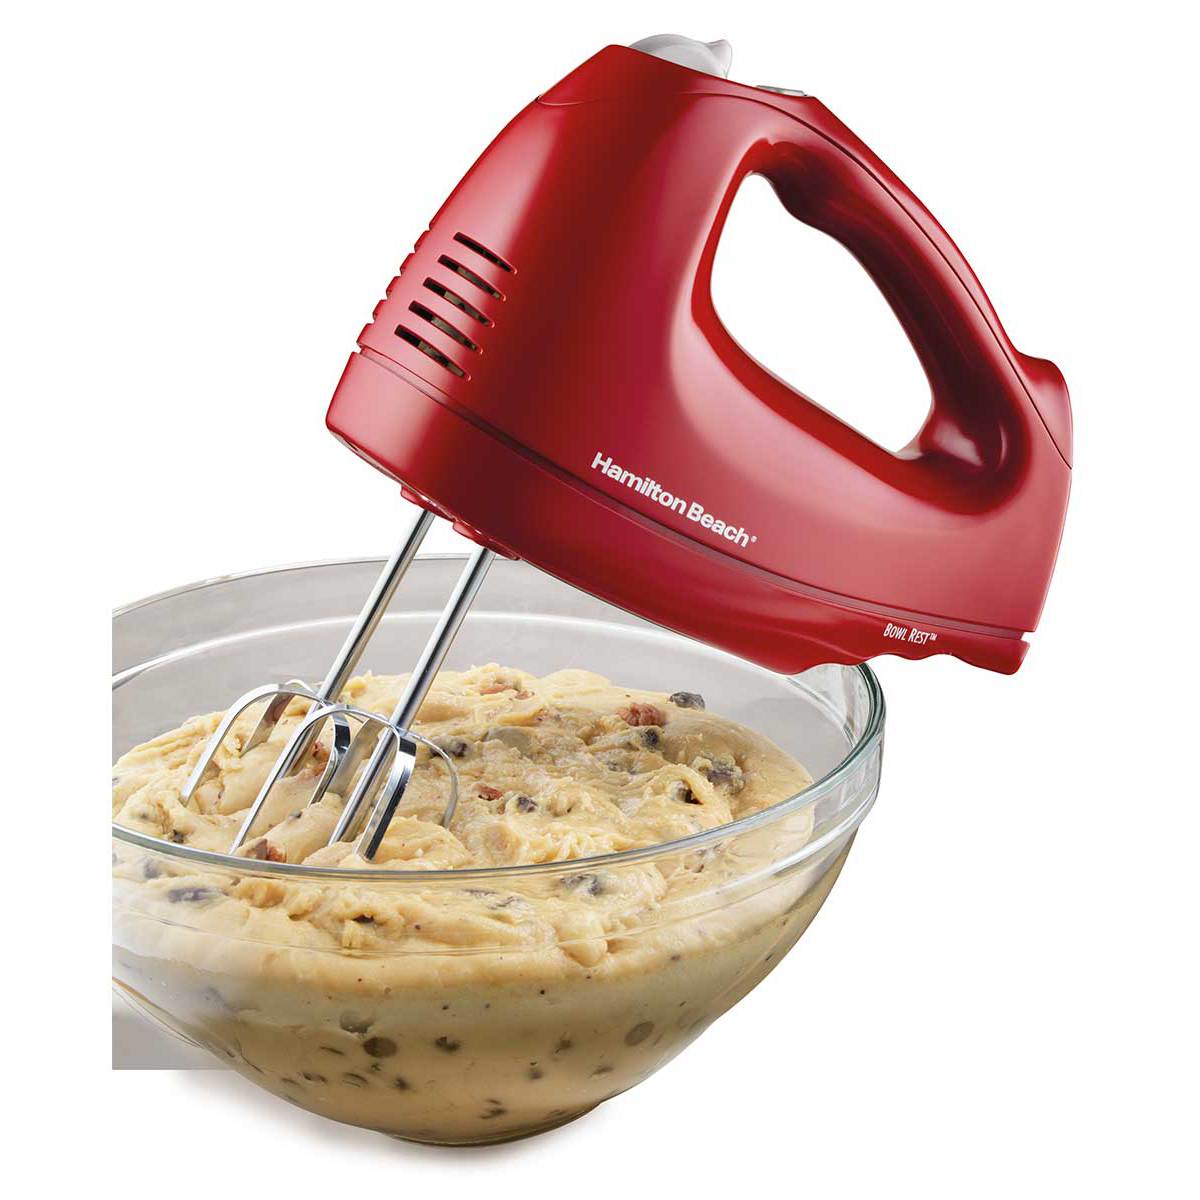 6 Speed Hand Mixer with Snap-On Case (62687)